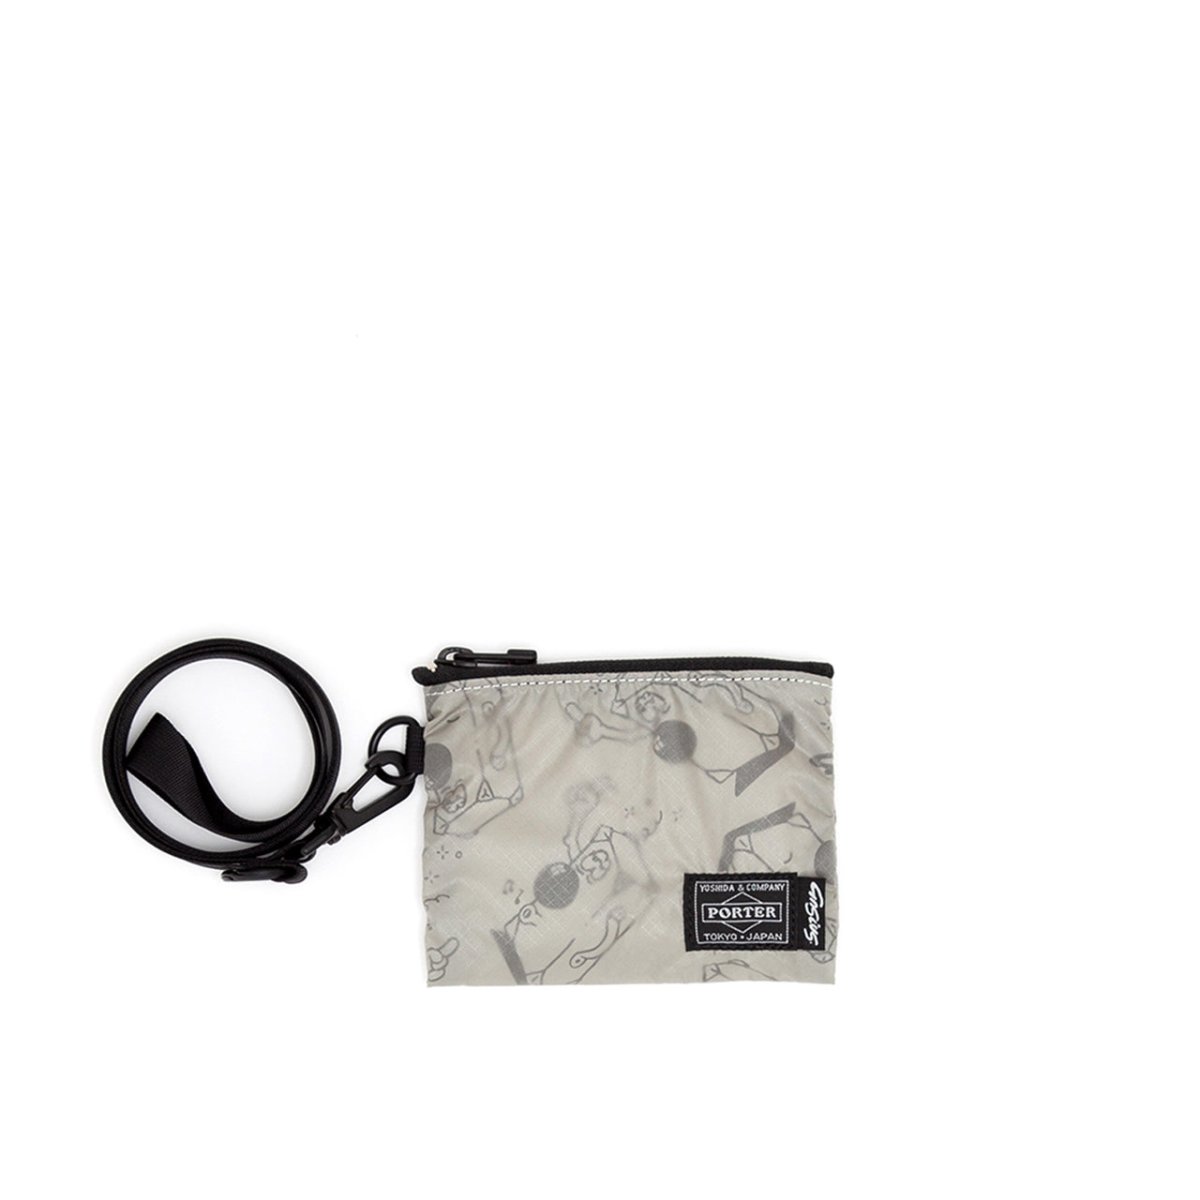 Image of Porter by Yoshida x Gasius Pouch and Strap (Grey)